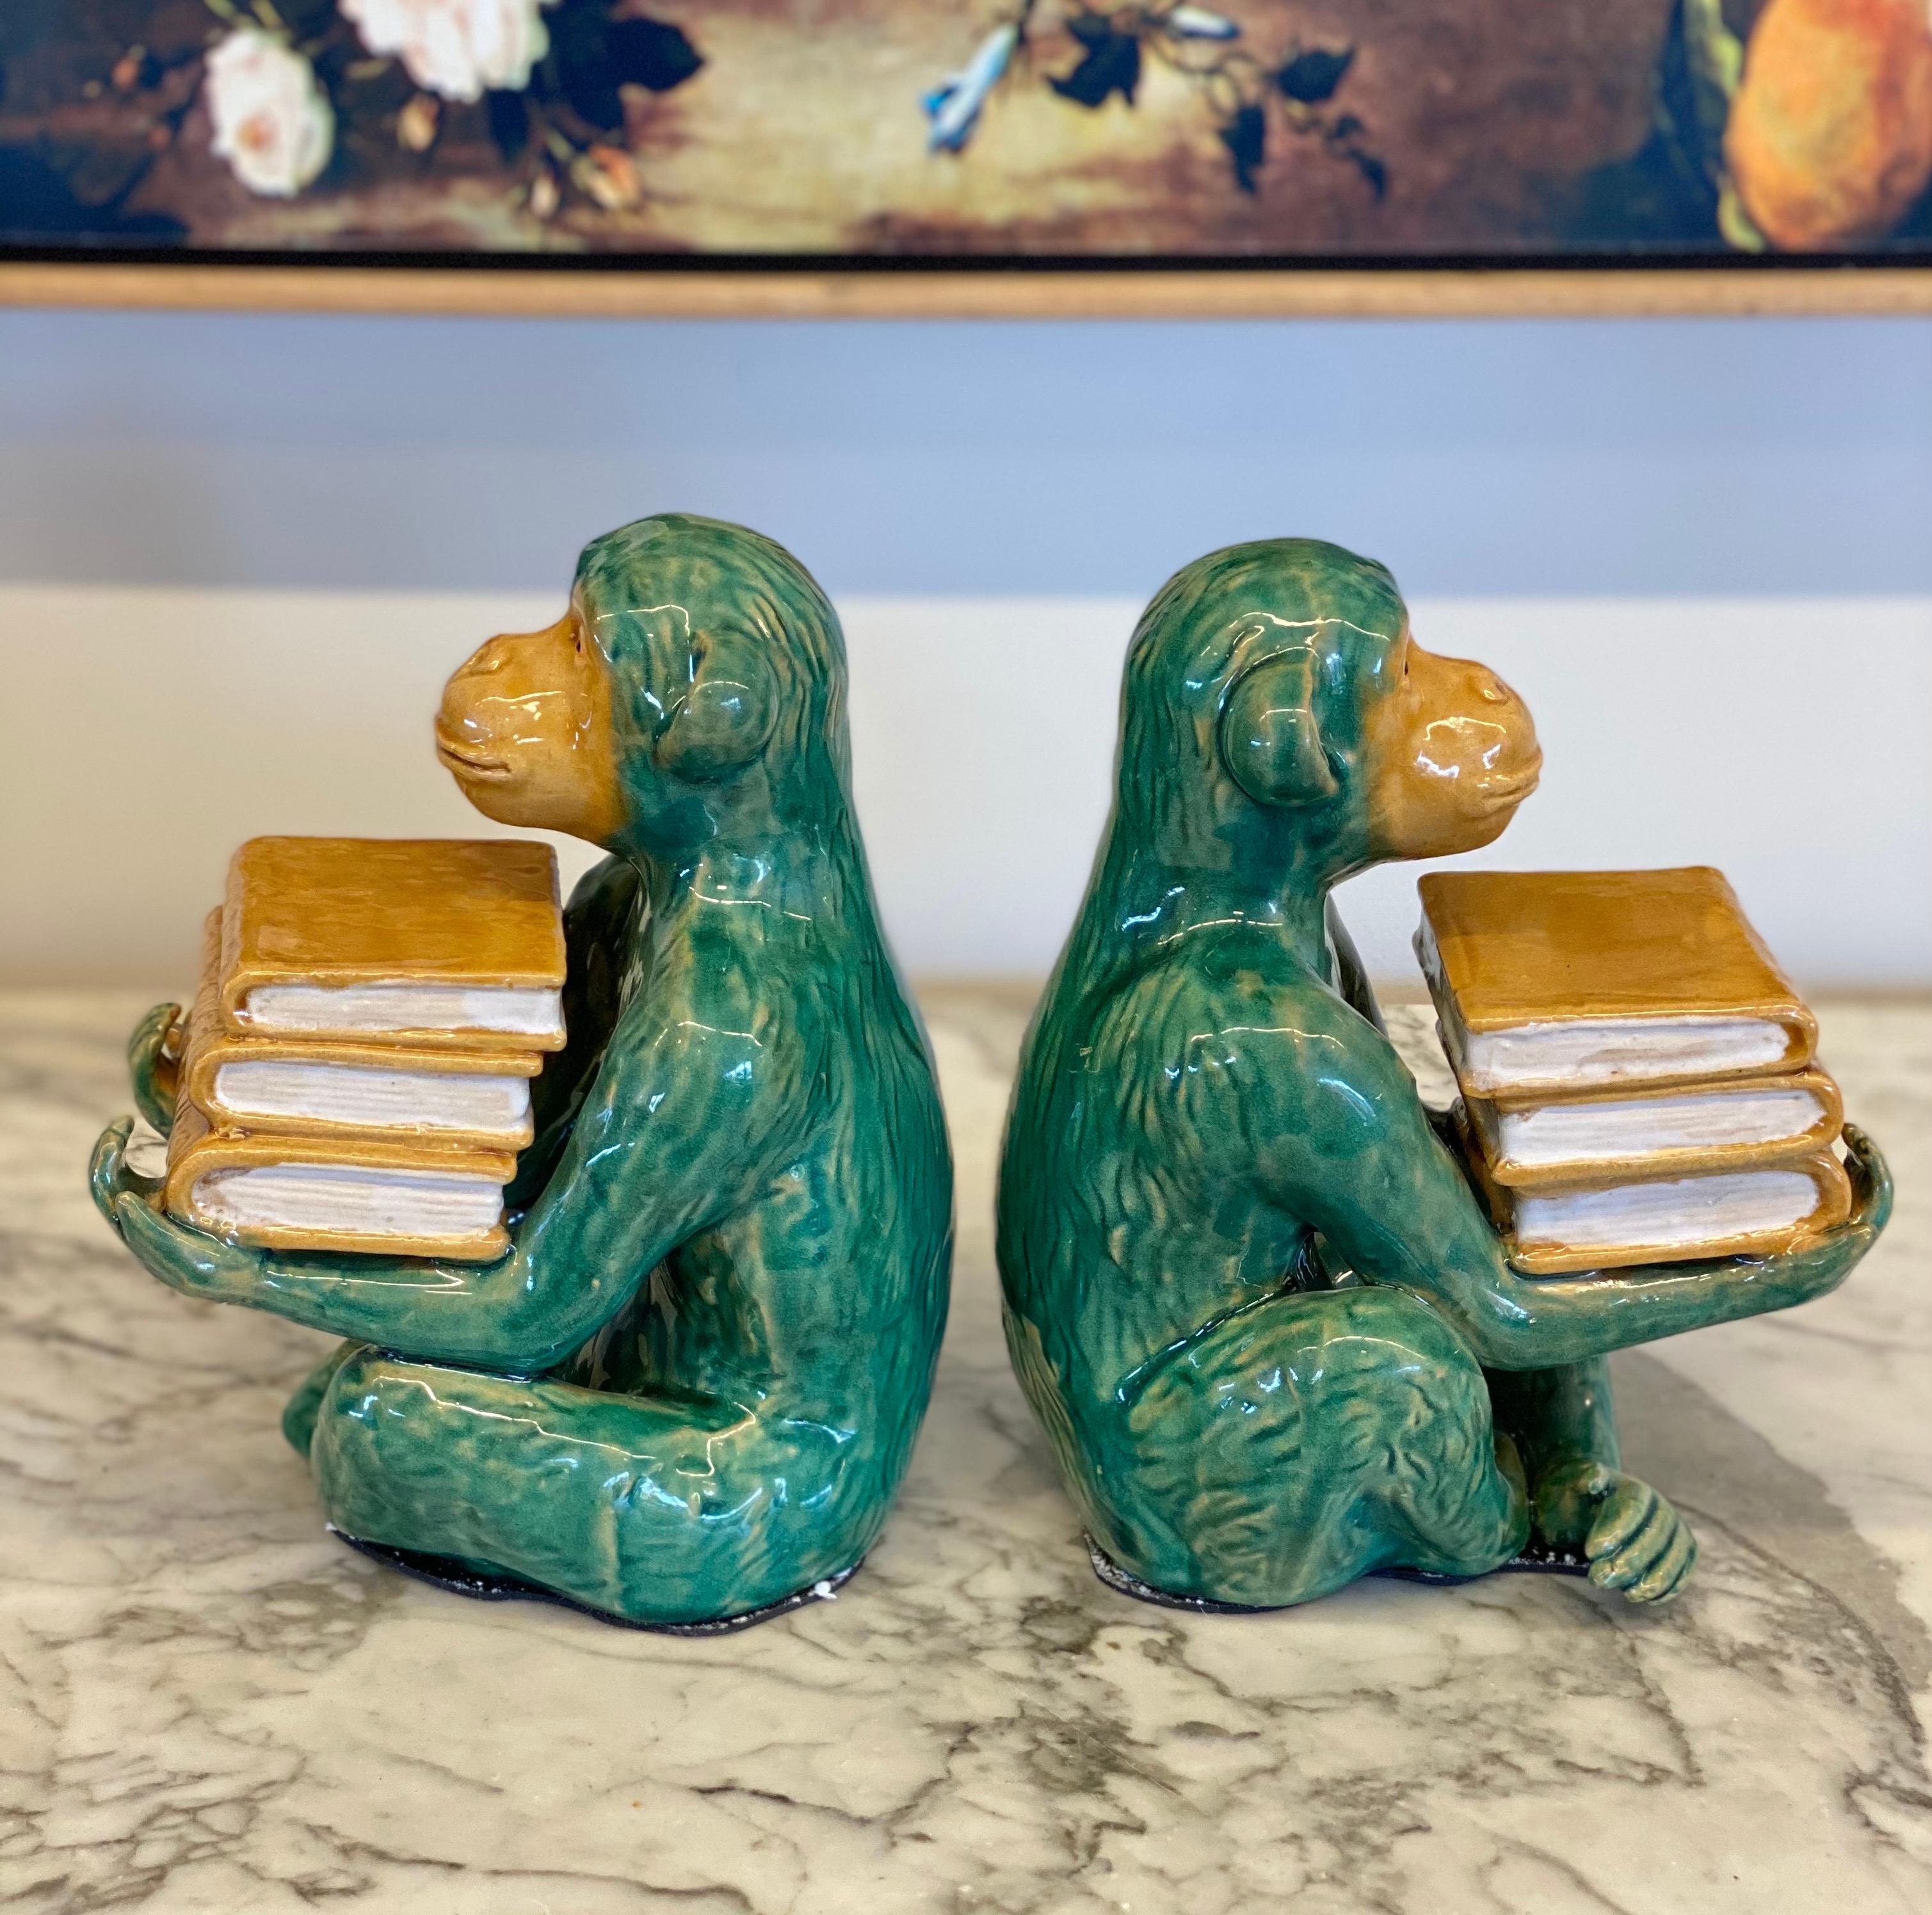 Pair of green/yellow monkey statues.

Measures: 8